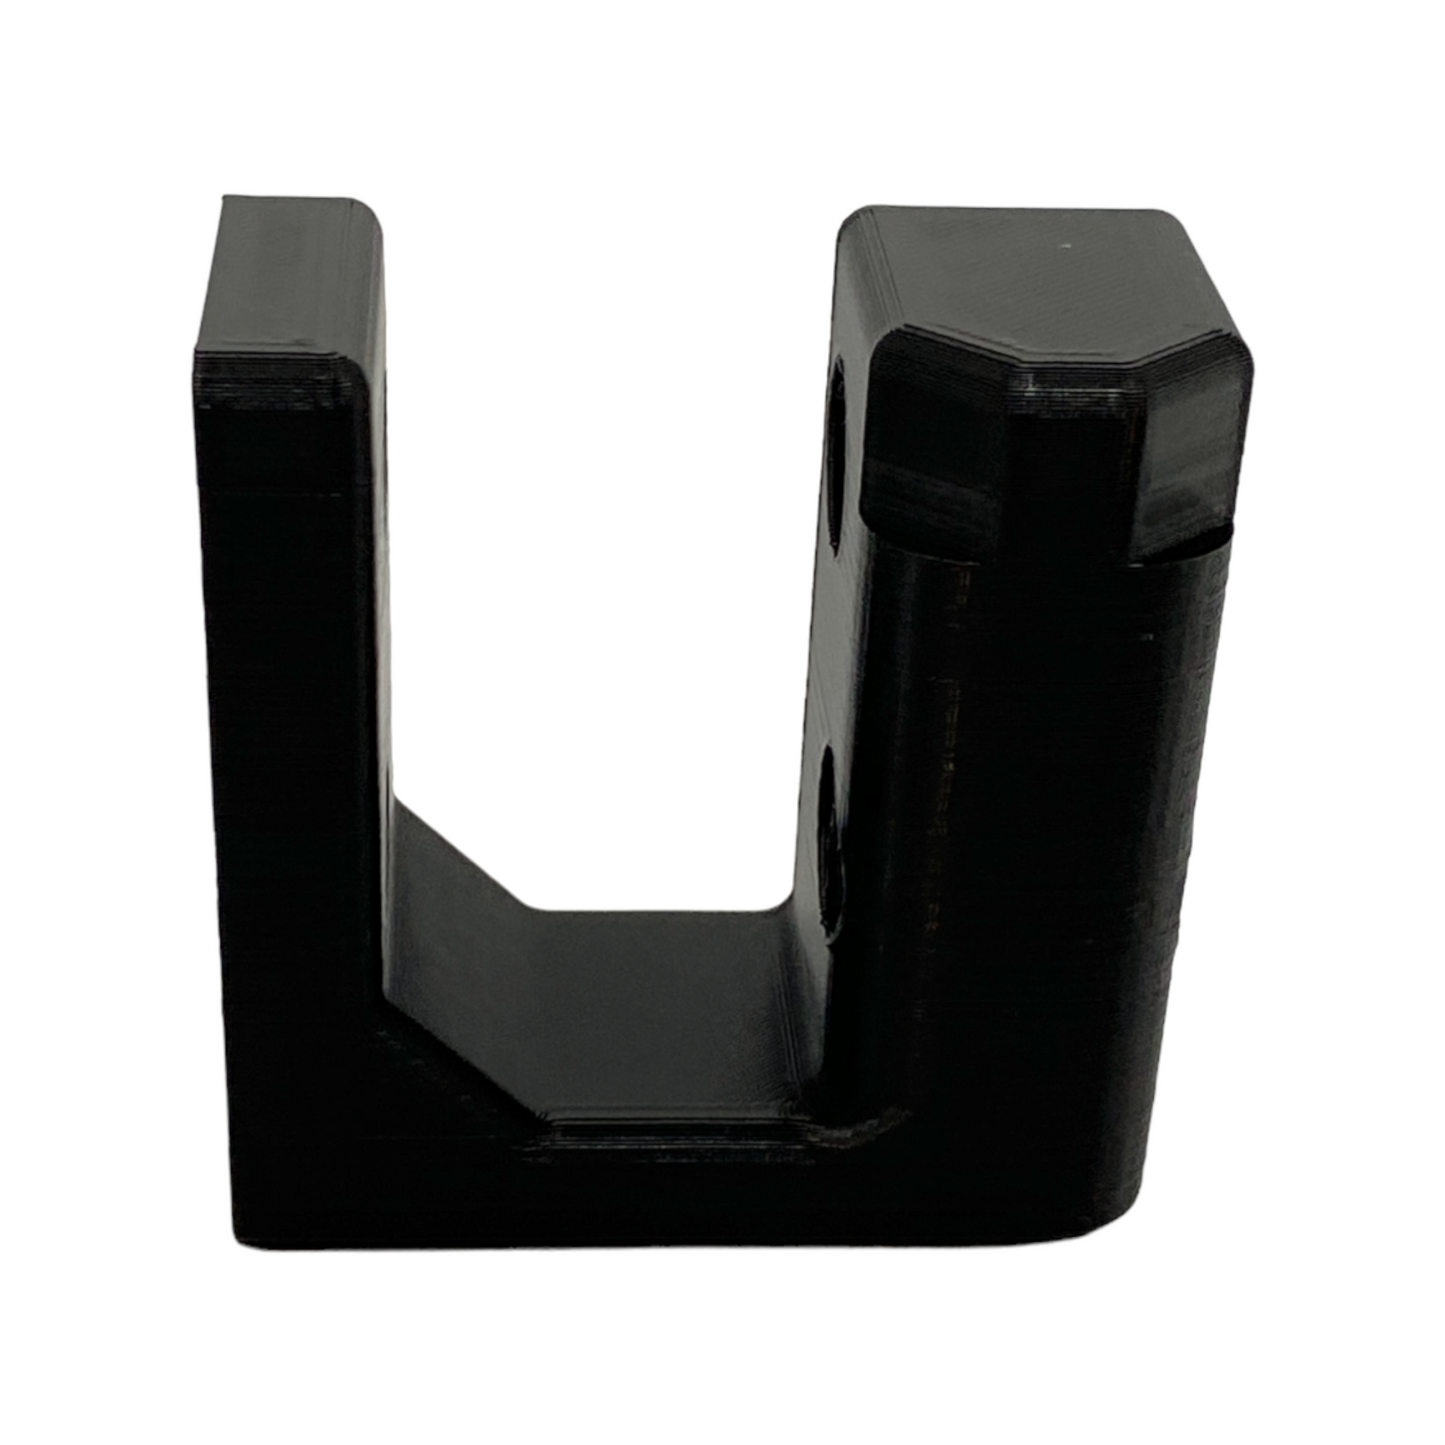 Glock Compatible Wall Mount